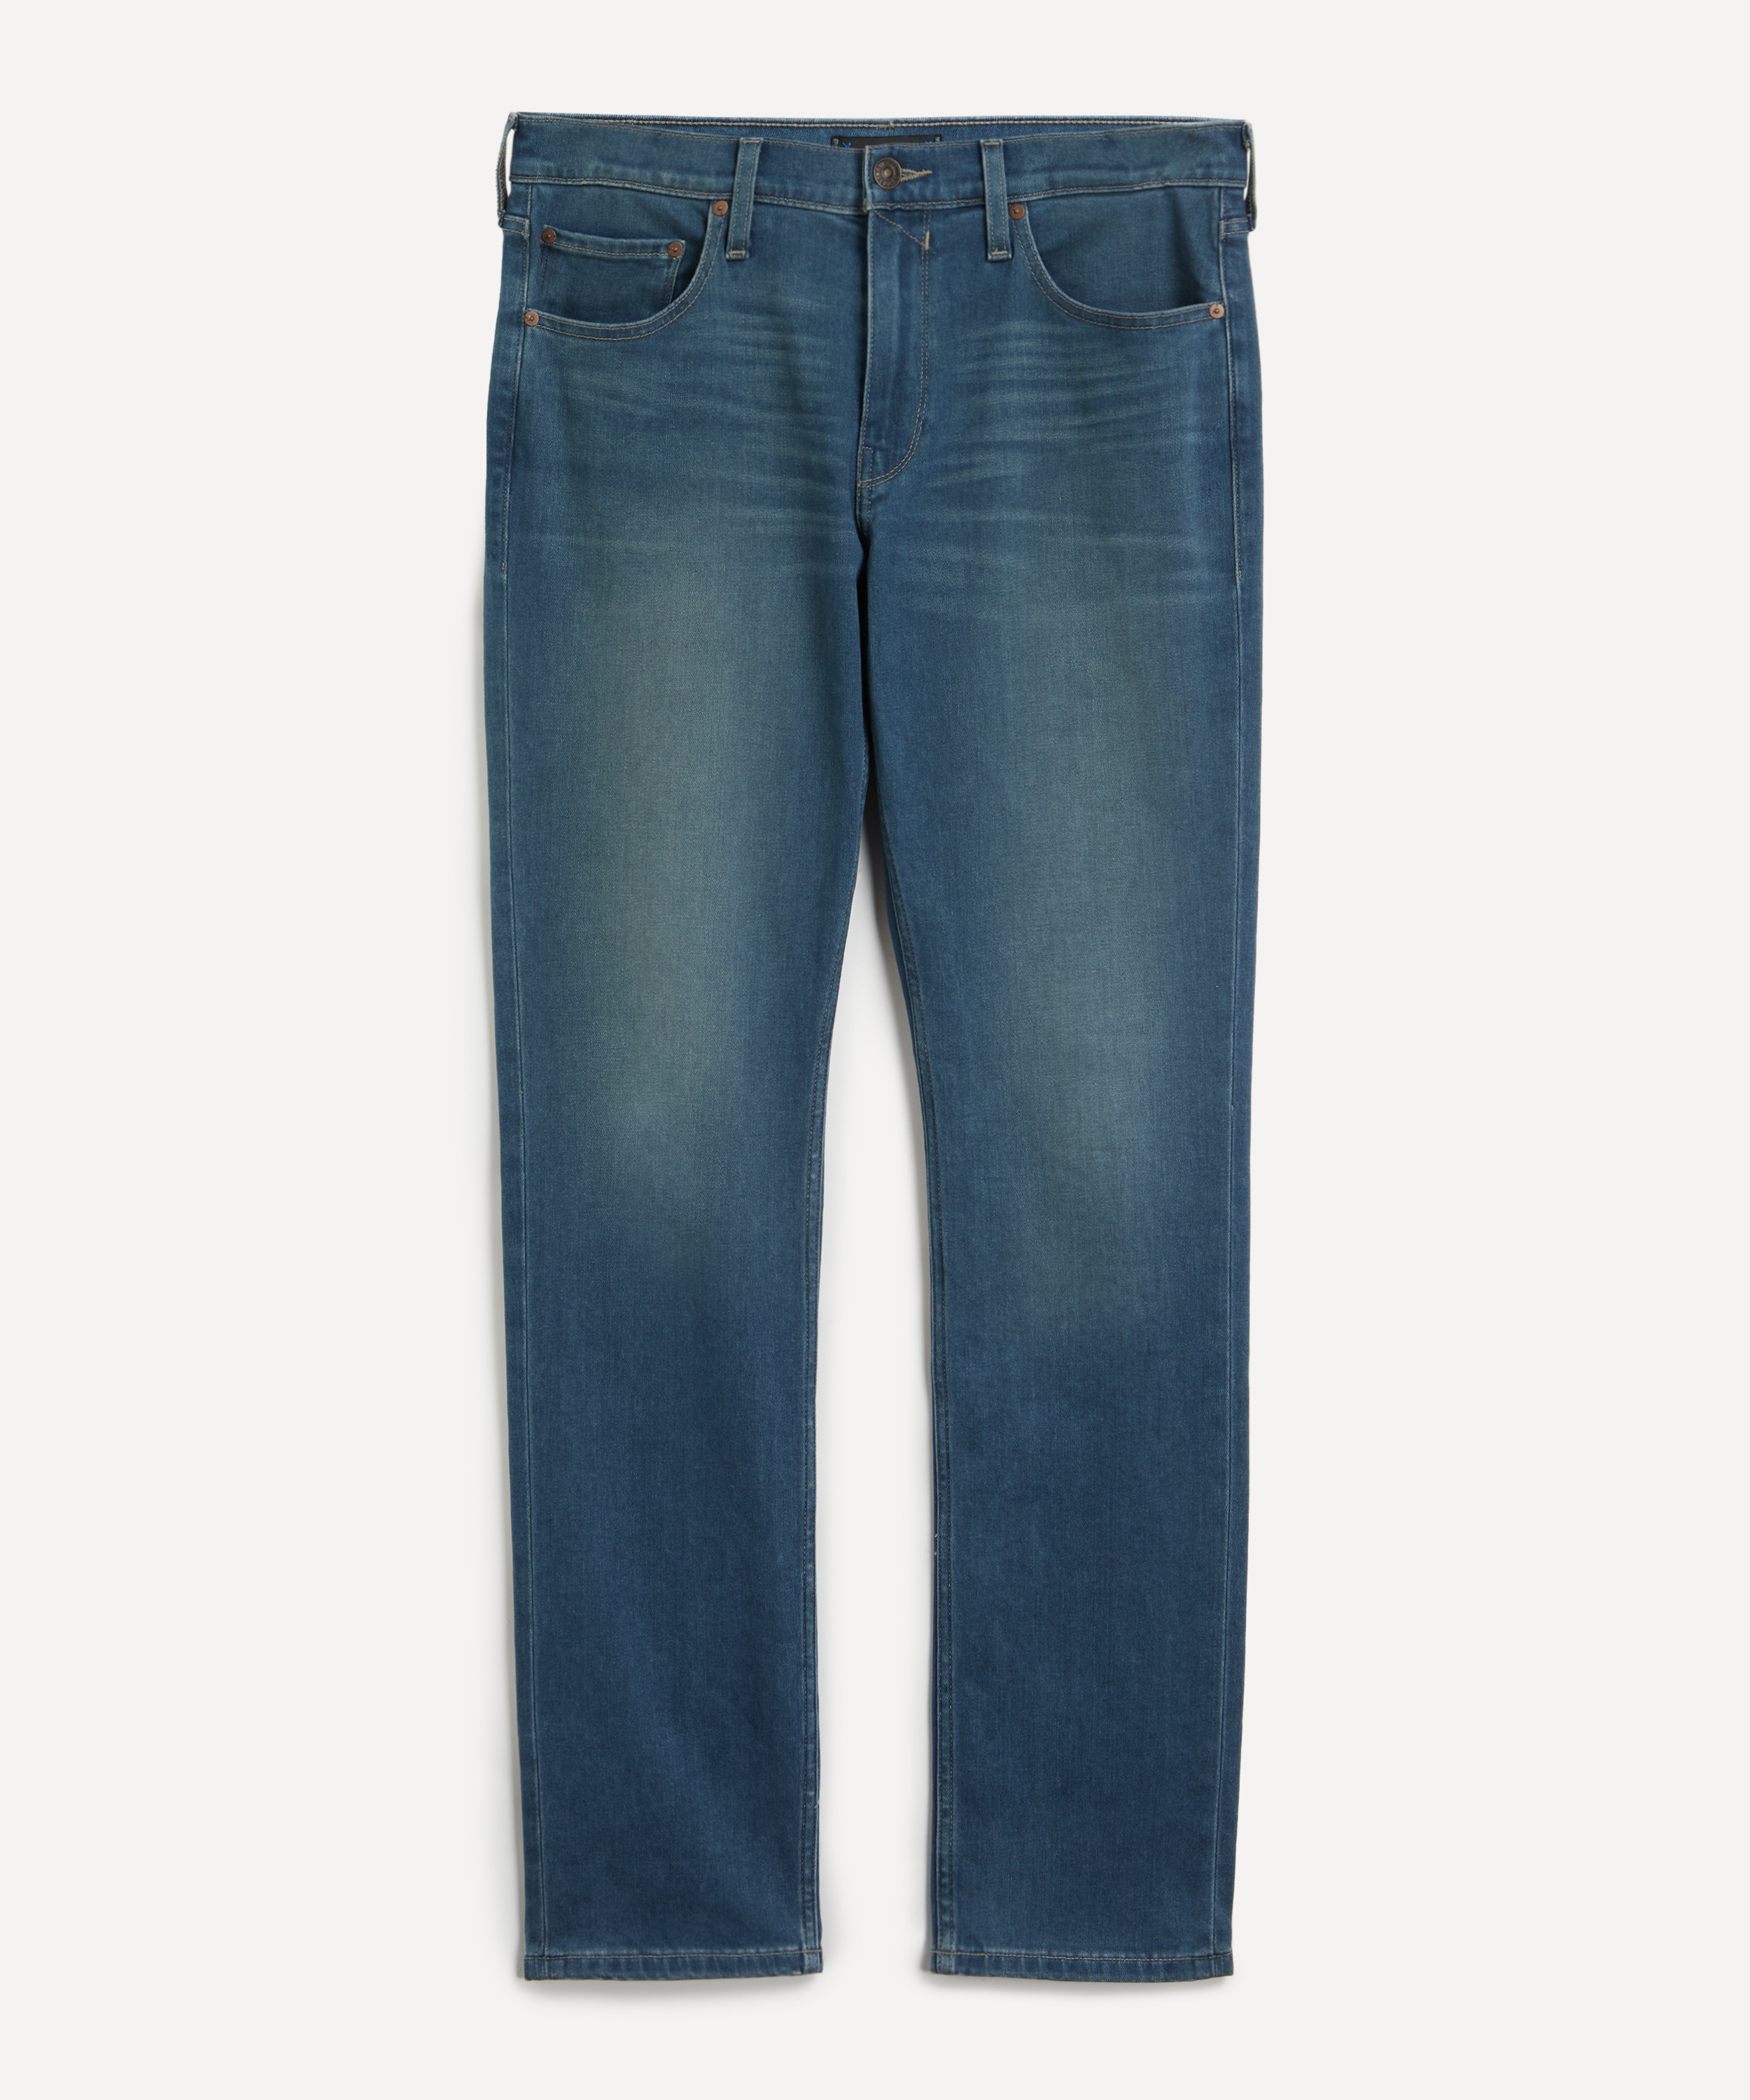 Paige - Federal Cool Blue Wash Jeans